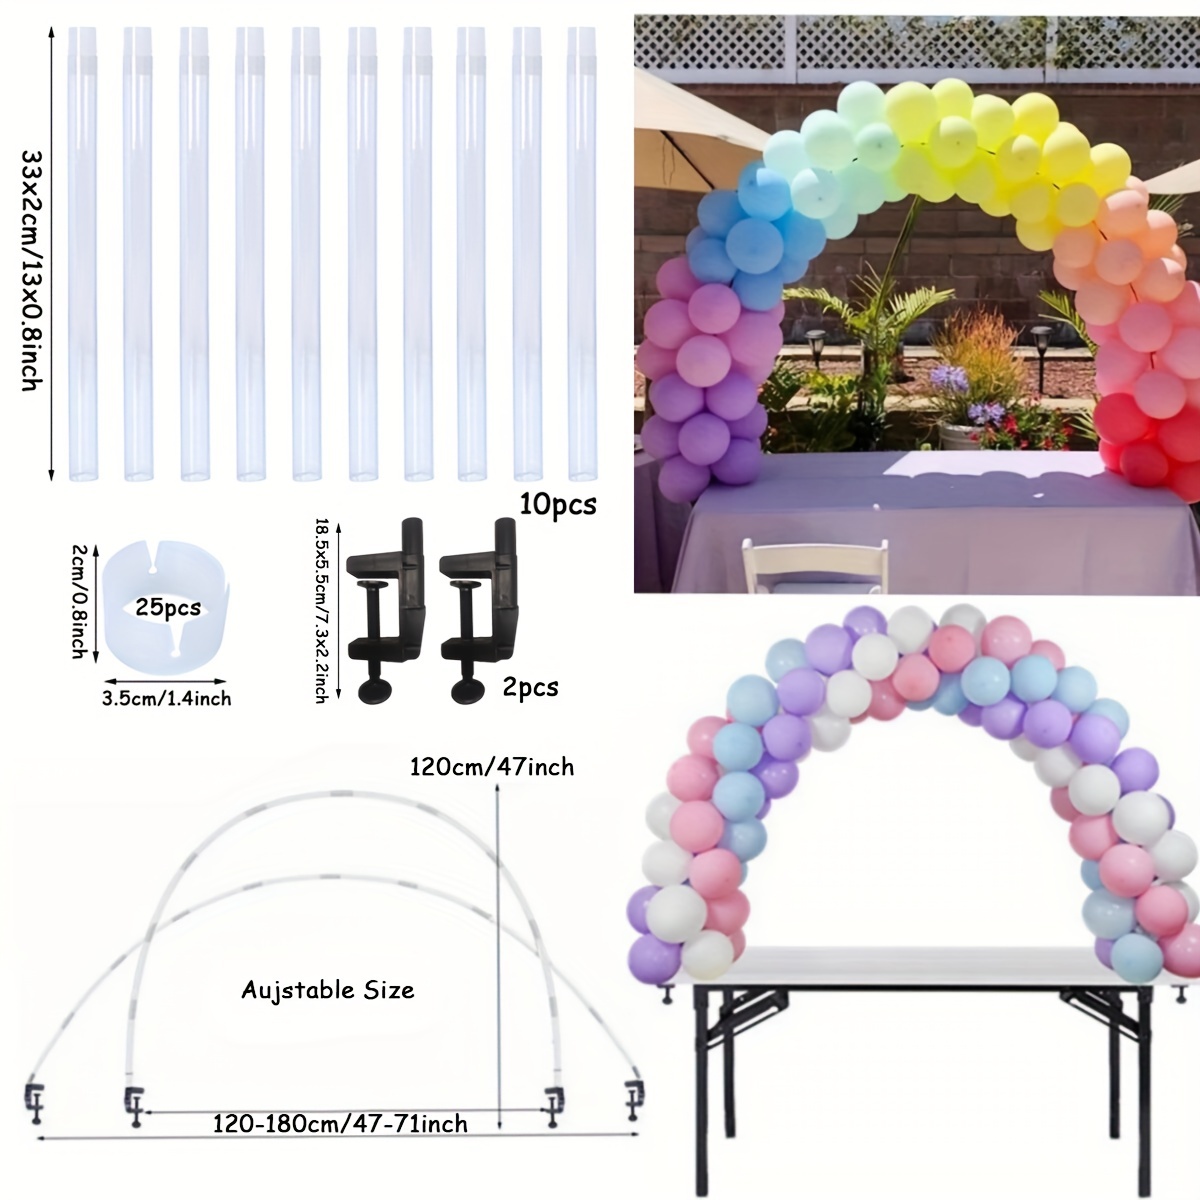 

Adjustable Table Balloon Arch Stand Holder, Bow Birthday Wedding Party Decor Balloon Base Halloween Gifts